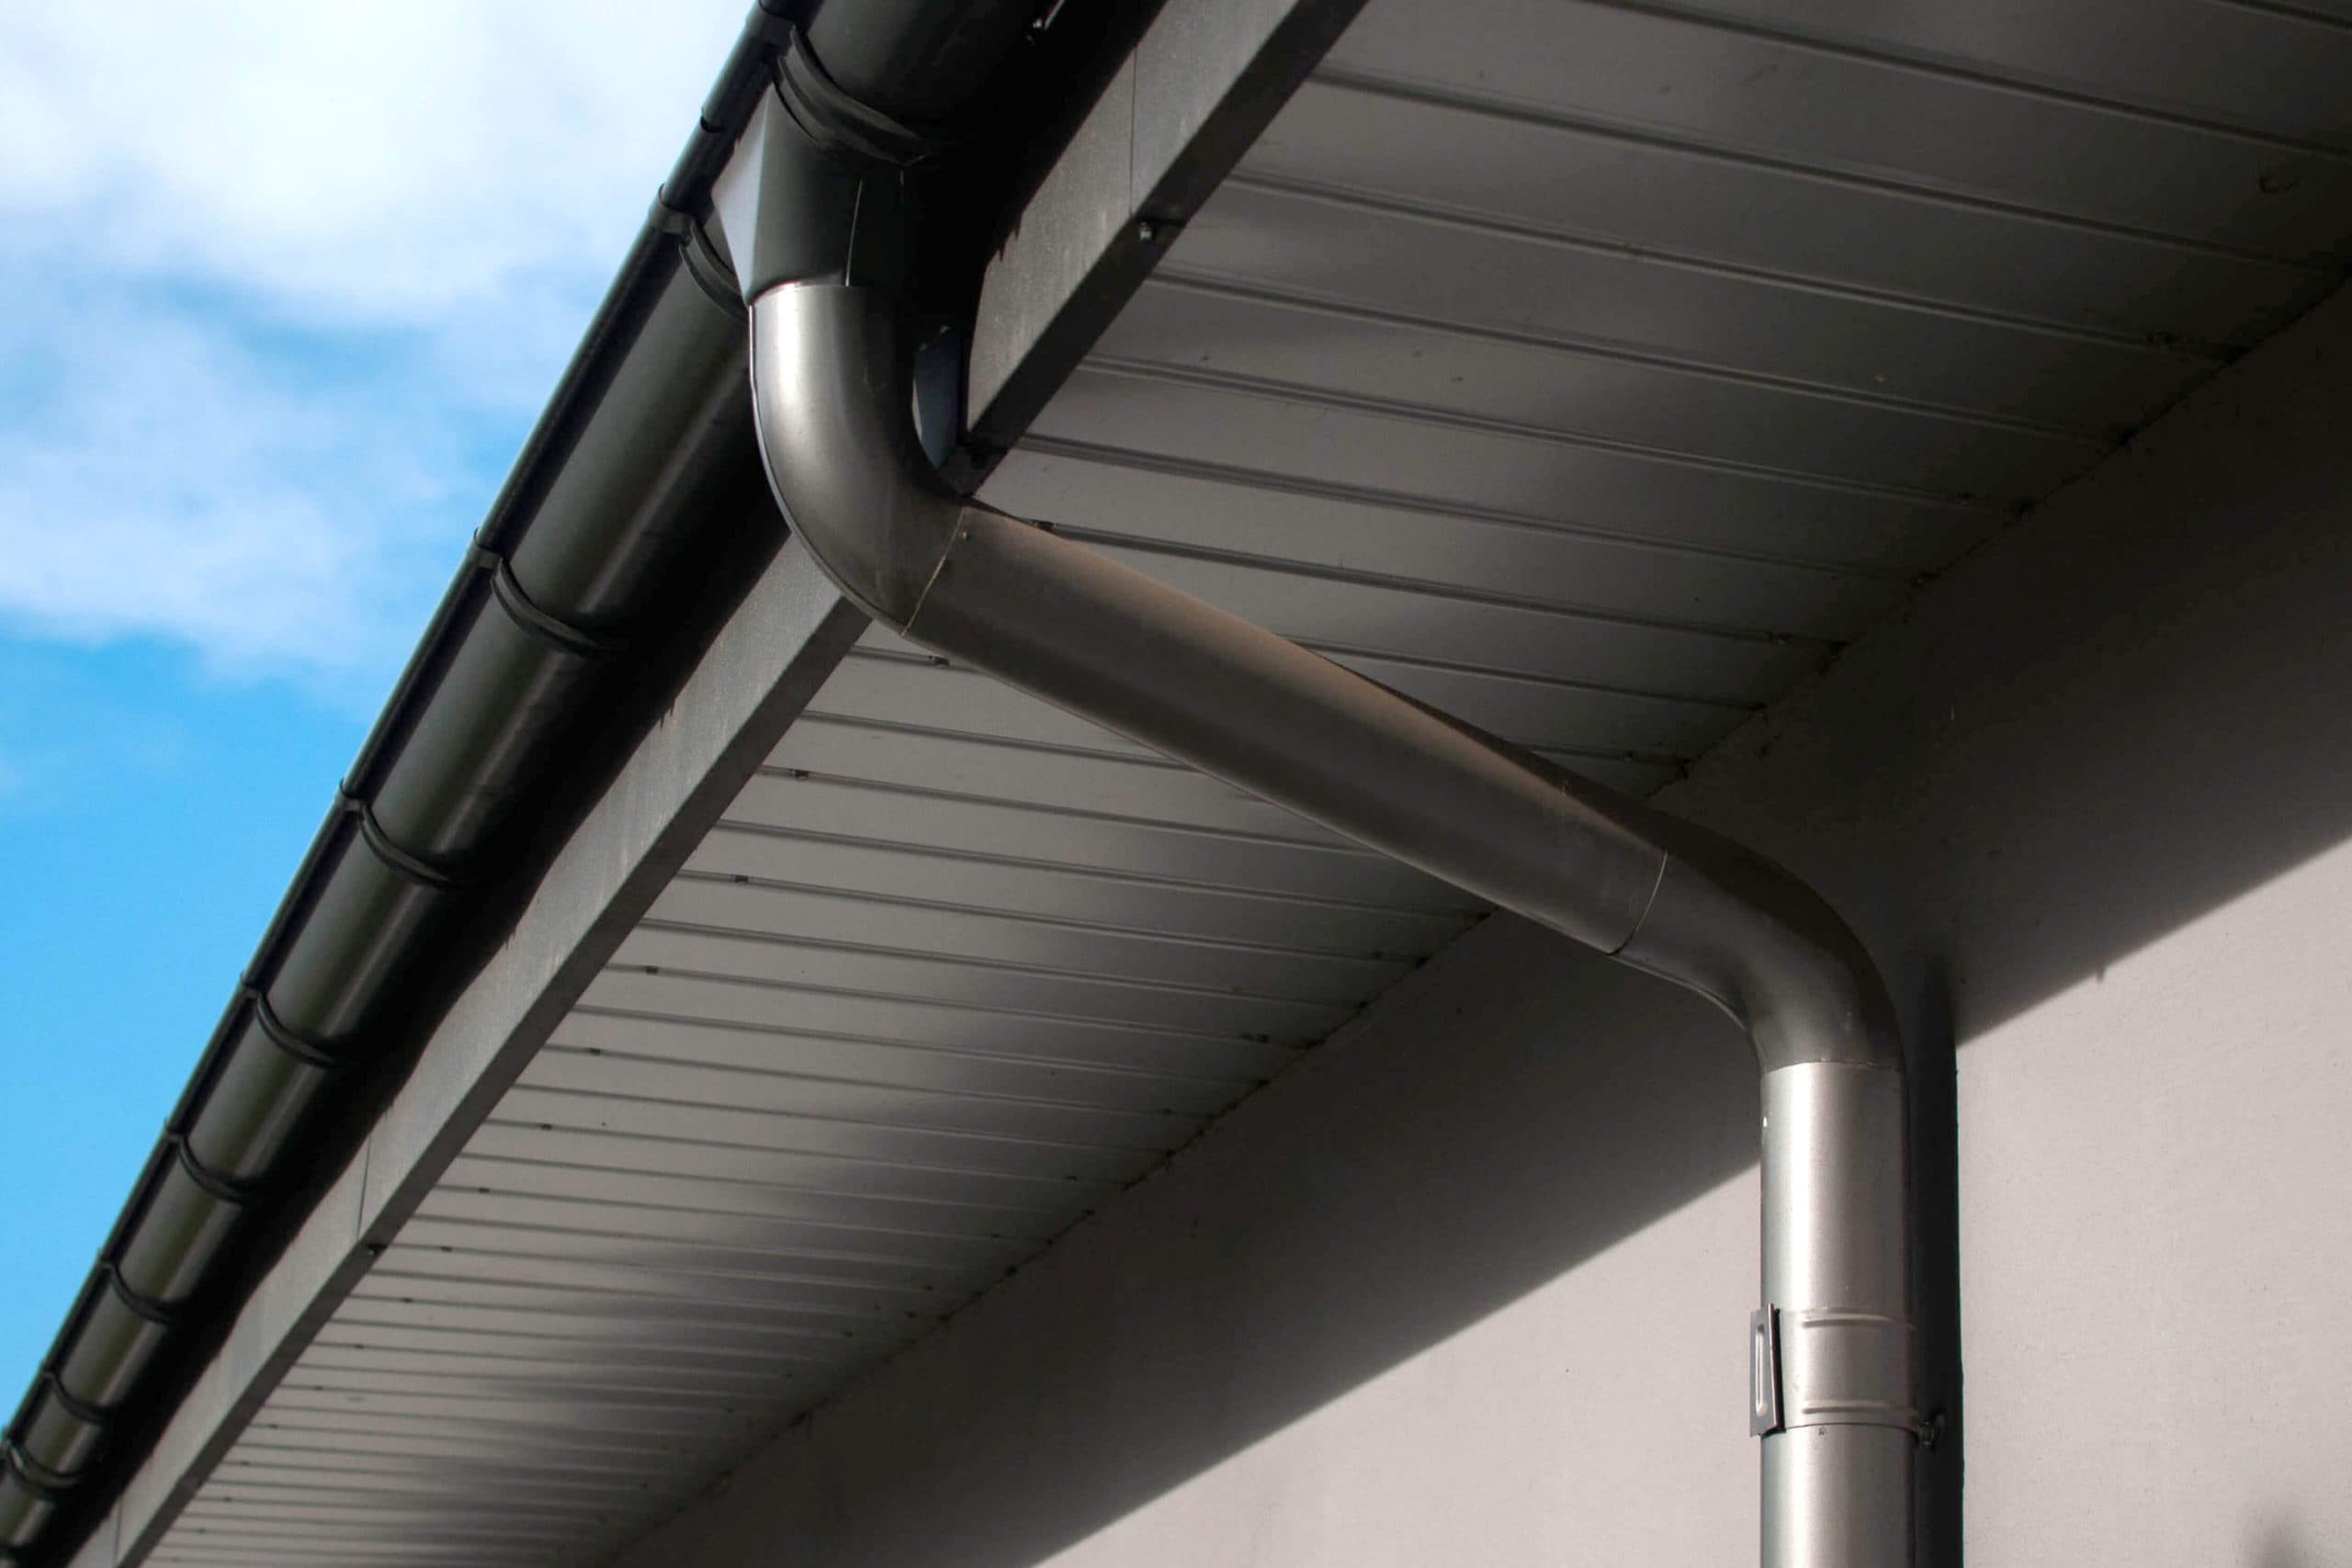 Corrosion-resistant galvanized gutters installed on a commercial building in Syracuse